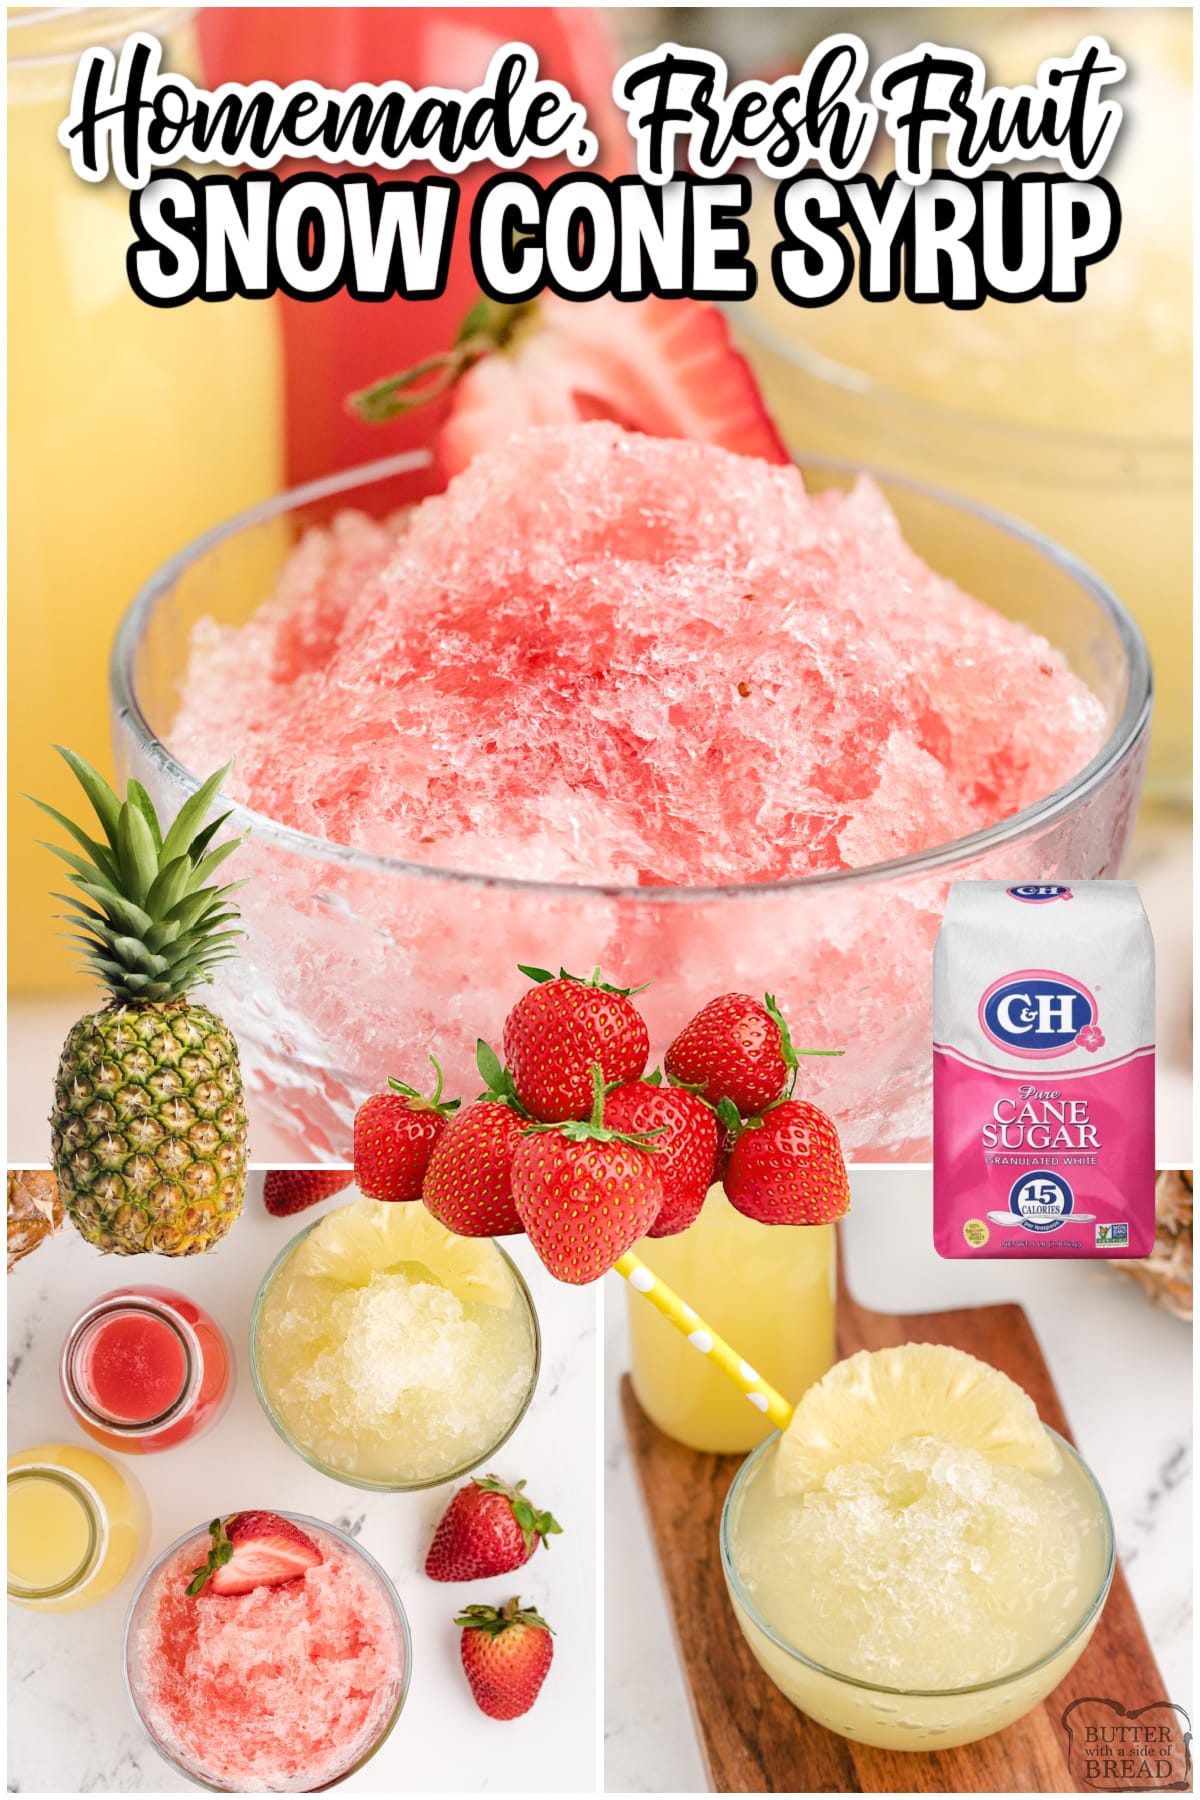 Homemade Snow Cone Syrup is perfect for a cool summer treat! This snow cone syrup recipe is made with fresh fruit, which is a much healthier and more delicious option than the store-bought syrups.